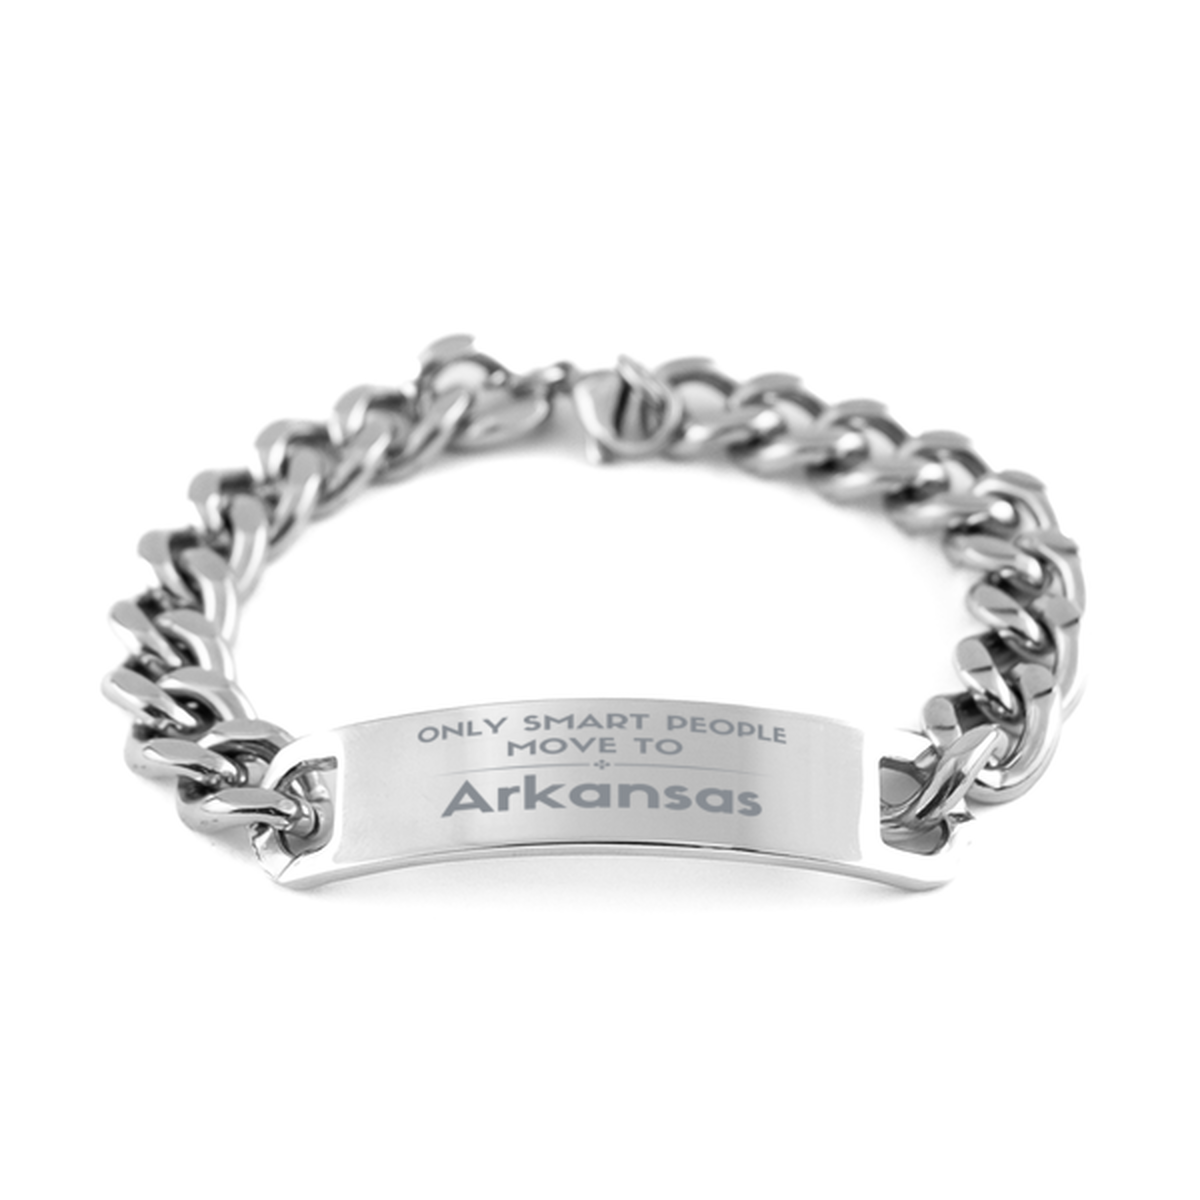 Only smart people move to Arkansas Cuban Chain Stainless Steel Bracelet, Gag Gifts For Arkansas, Move to Arkansas Gifts for Friends Coworker Funny Saying Quote